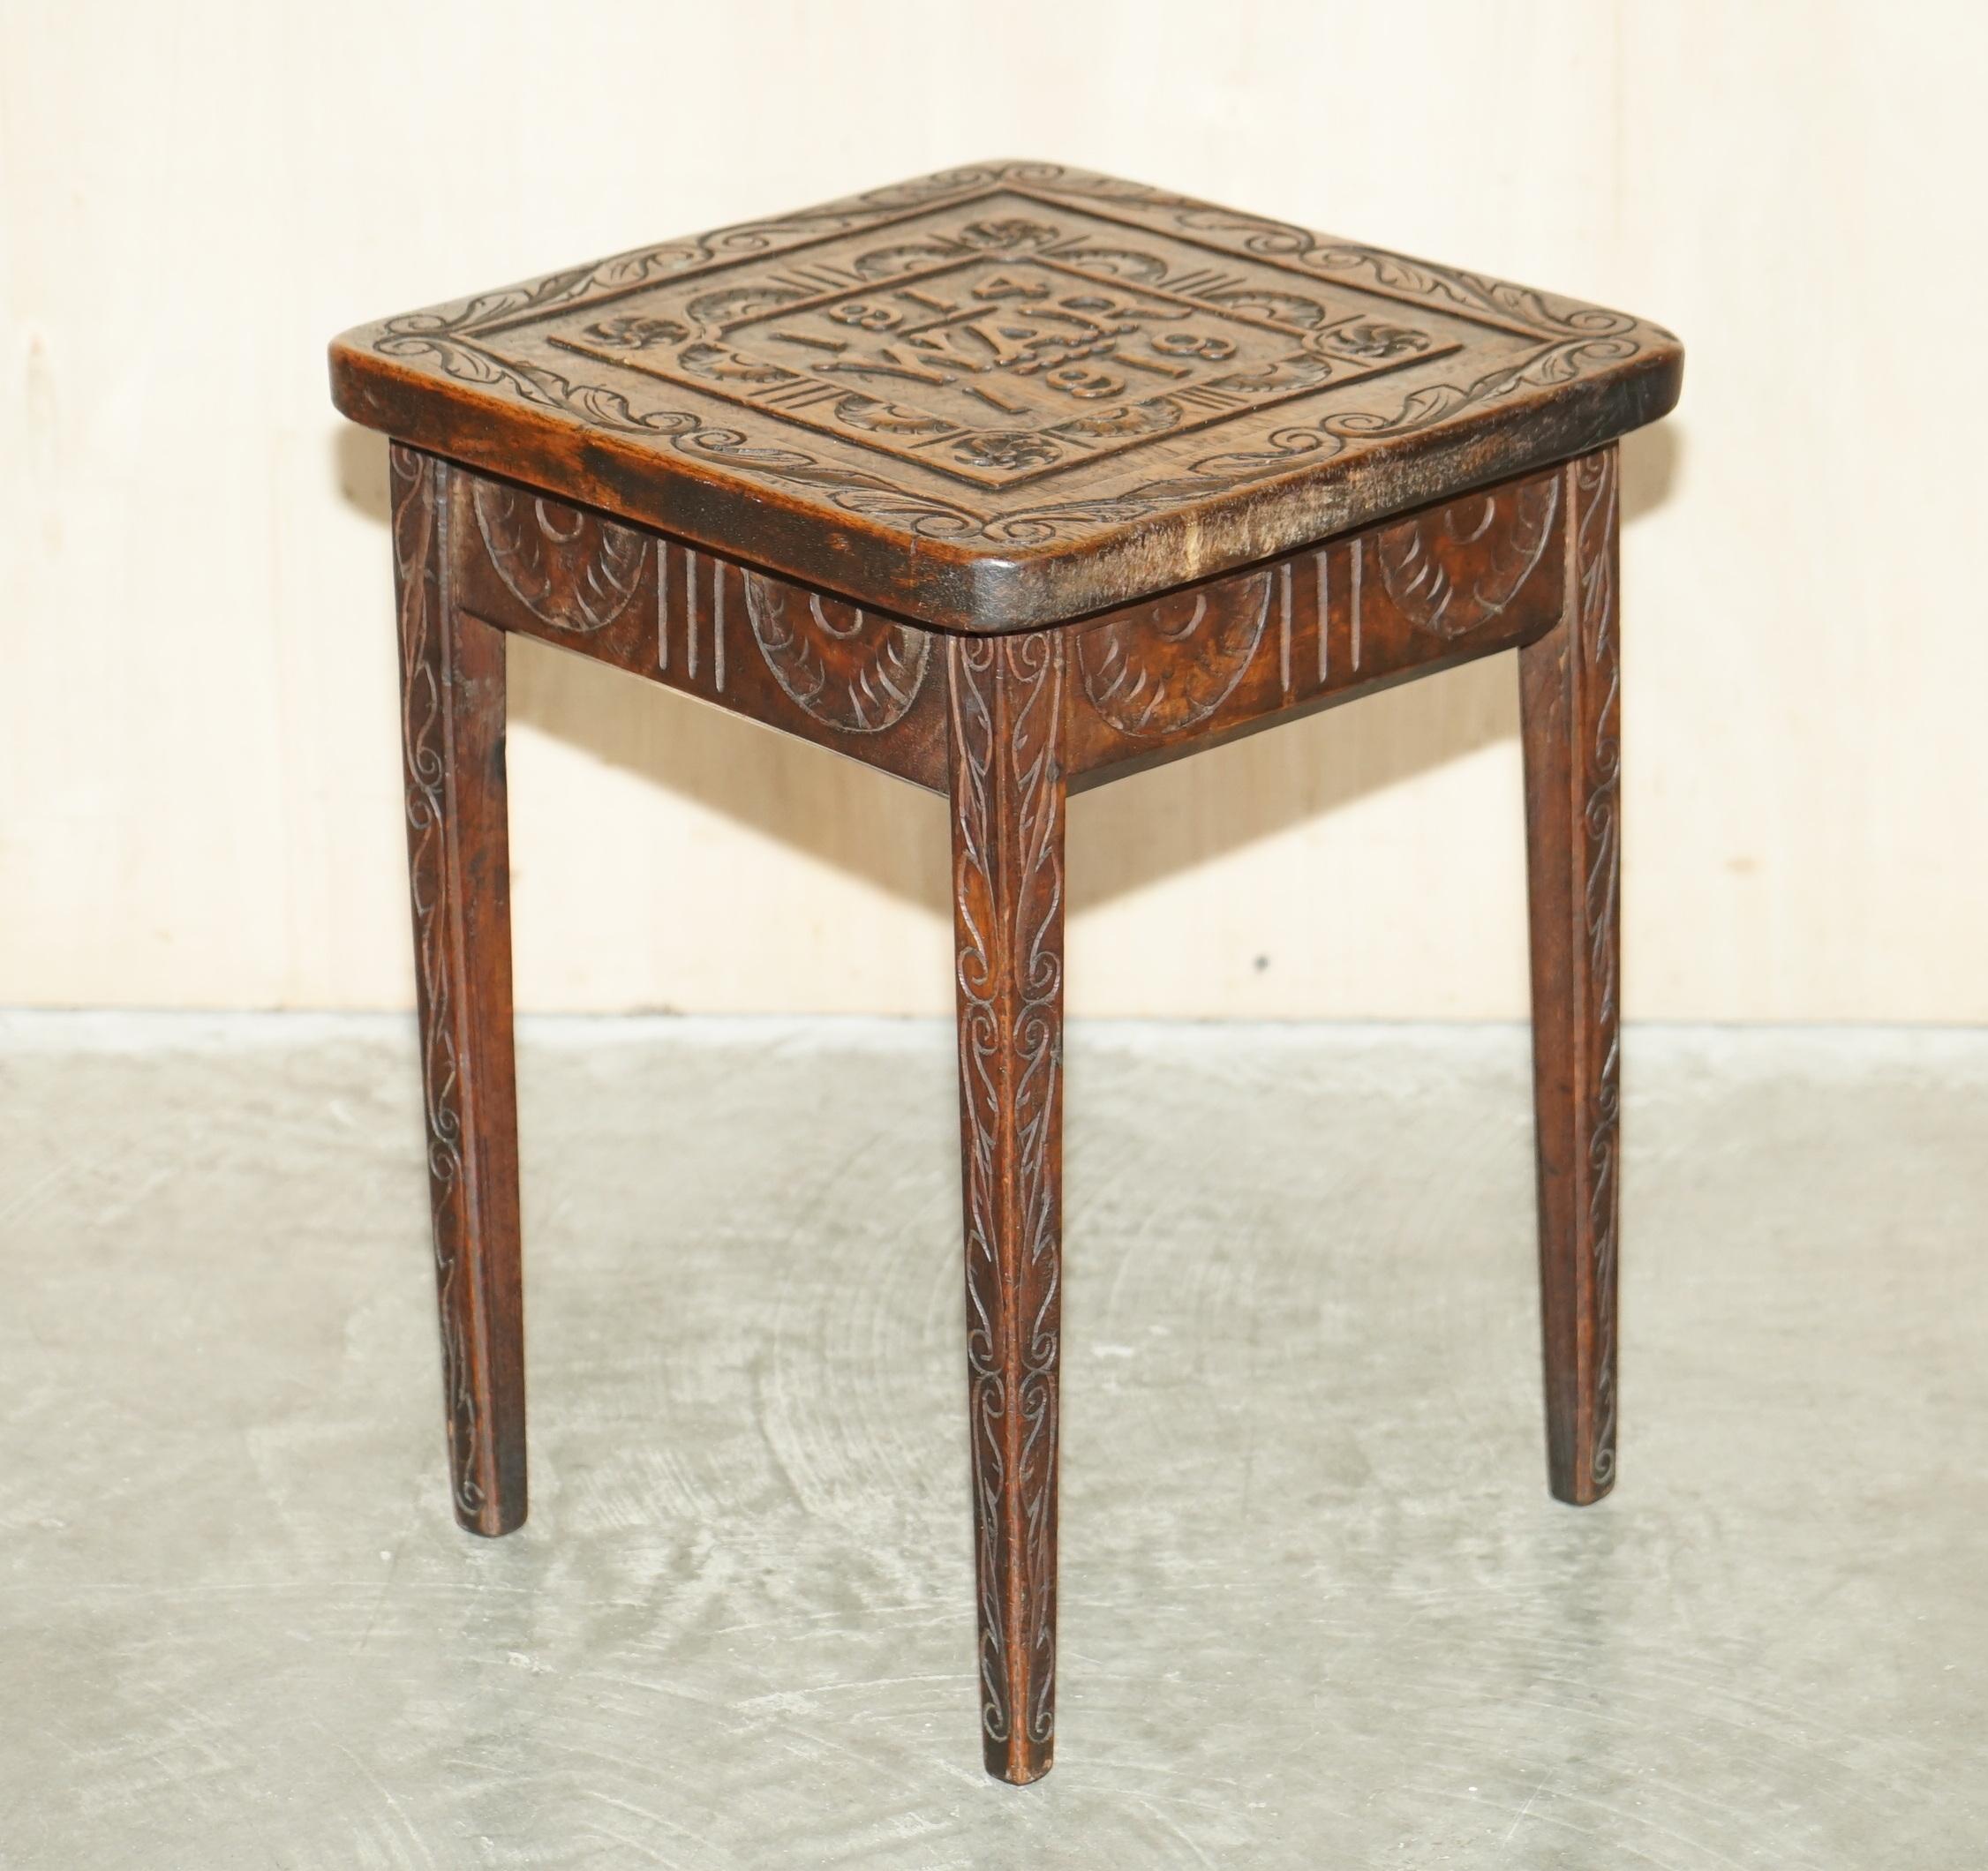 We are delighted to offer for sale this lovely one of a kind WWI commemorative hand carved side table.

A good-looking piece, its hand carved from top to bottom with Jacobean floral detailing, the top as you can see commemorates the first world